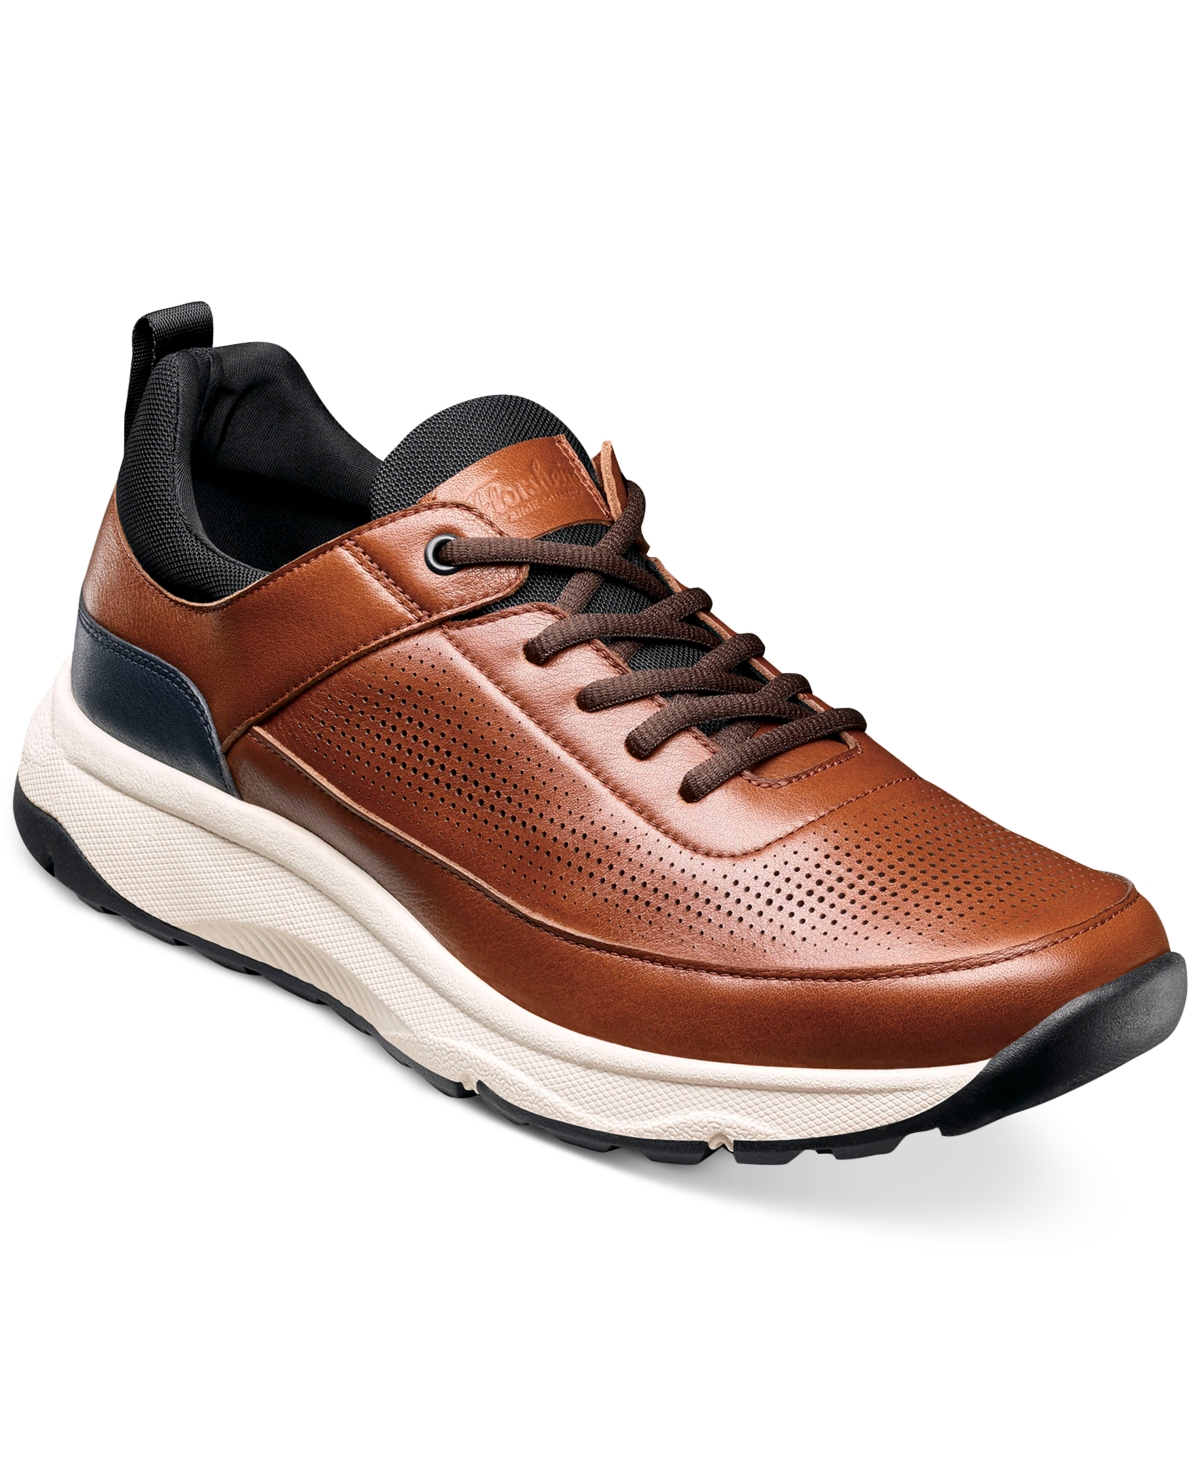 Men's Satellite Perforated Toe Leather Lace-up Sneaker - Cognac